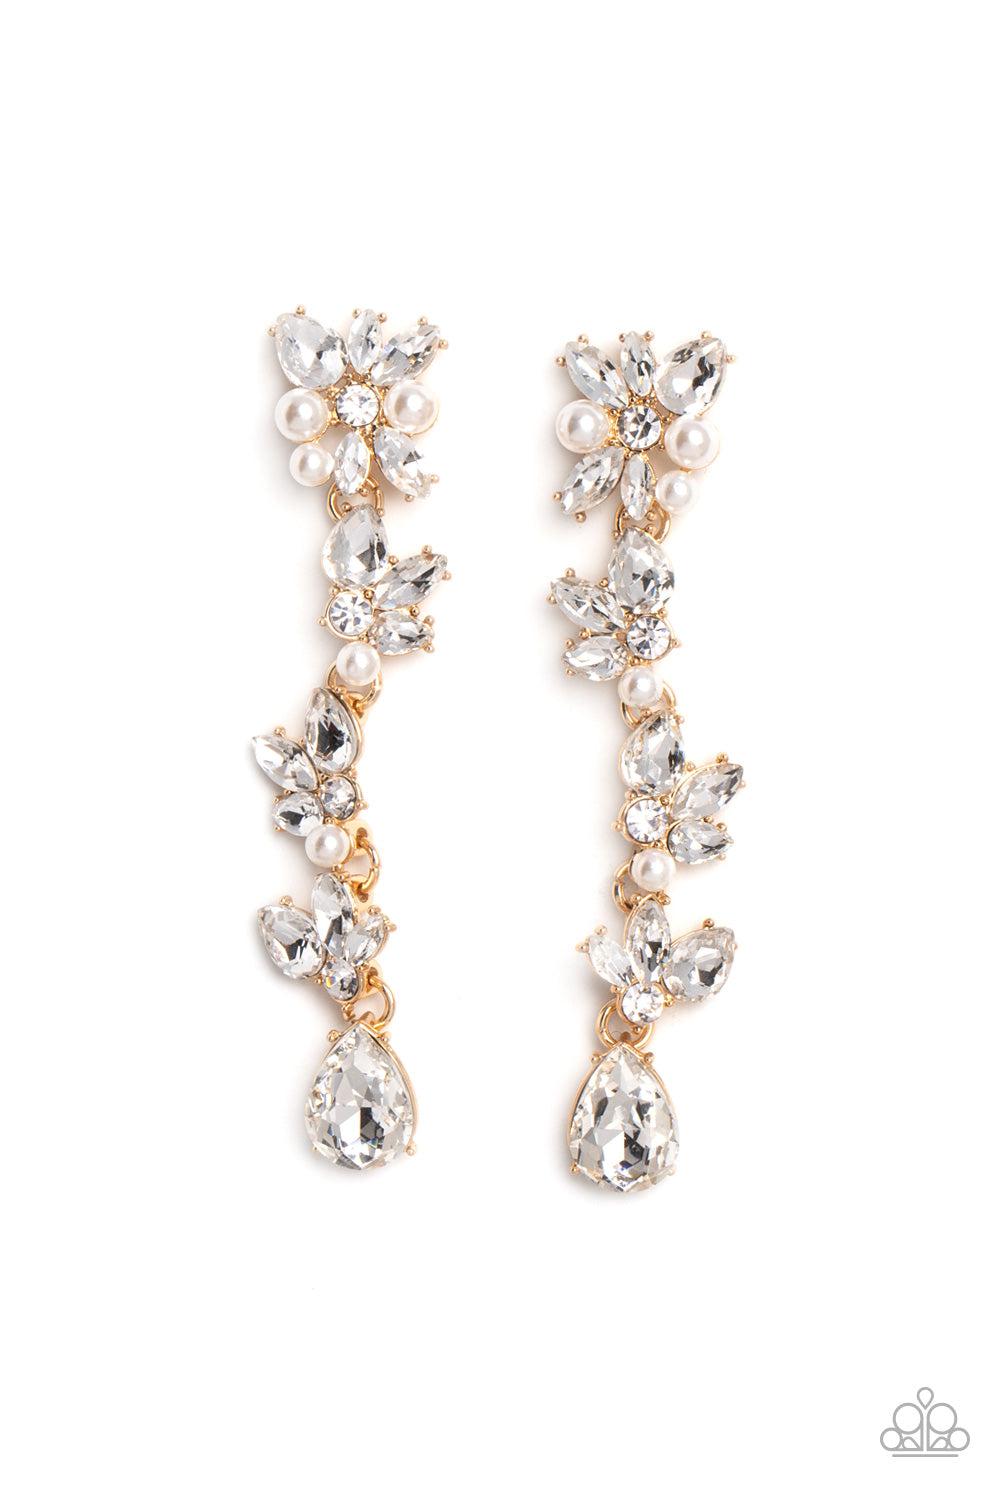 LIGHT at the Opera Gold and White Rhinestone & Pearl Earrings - Paparazzi Accessories- lightbox - CarasShop.com - $5 Jewelry by Cara Jewels